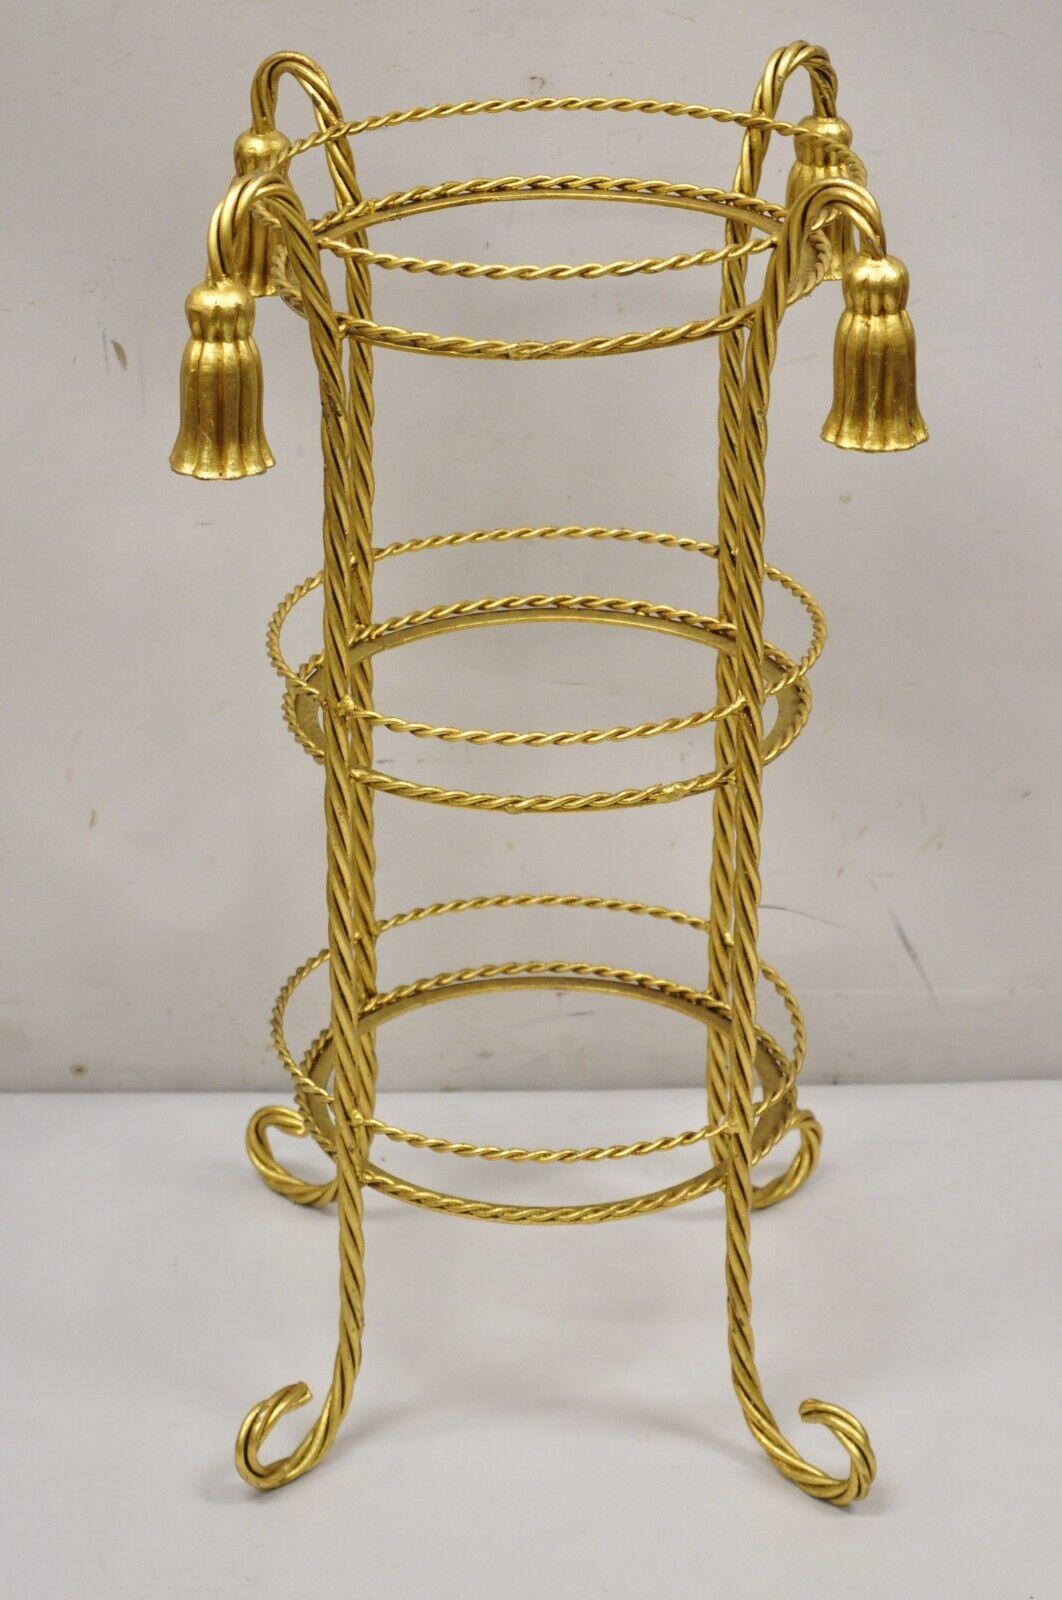 Vintage Italian Hollywood Regency 3 Tier Gold Iron Rope Tassel Muffin Stand Accent Side Tables - Single. Item features 3 round tiers (approx. 11.25 diameter. Does not include glass). Iron metal frame, gold leaf gilt finish, tassel form accents,